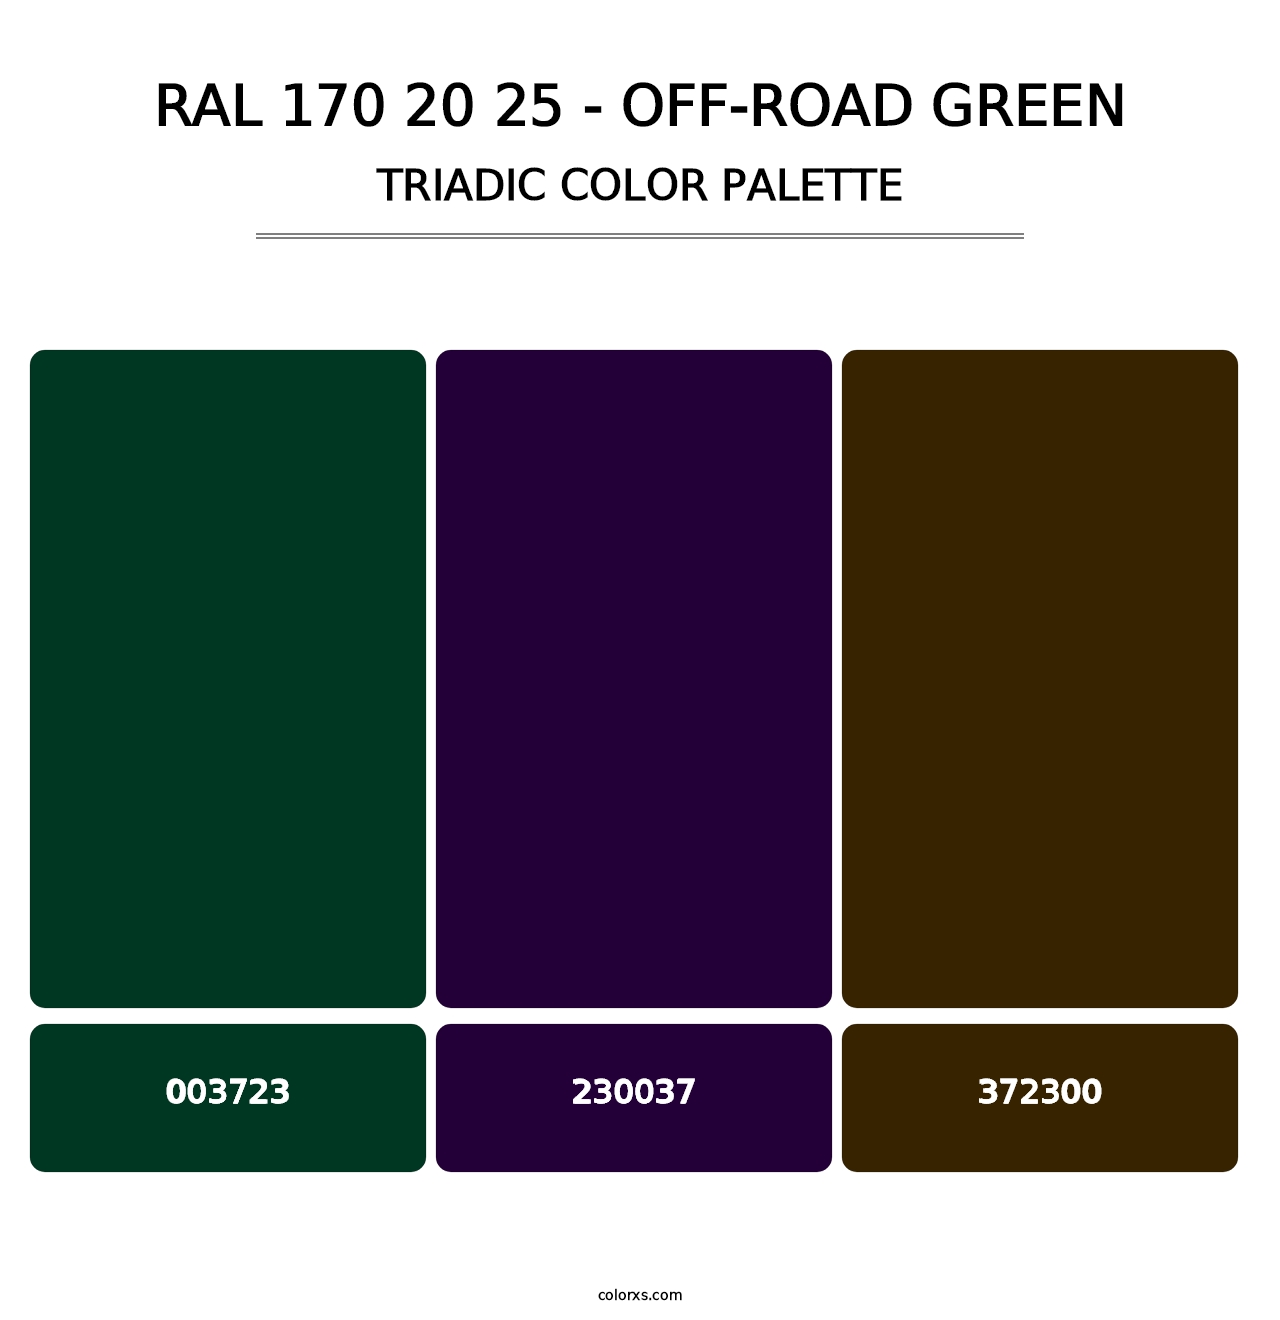 RAL 170 20 25 - Off-Road Green - Triadic Color Palette